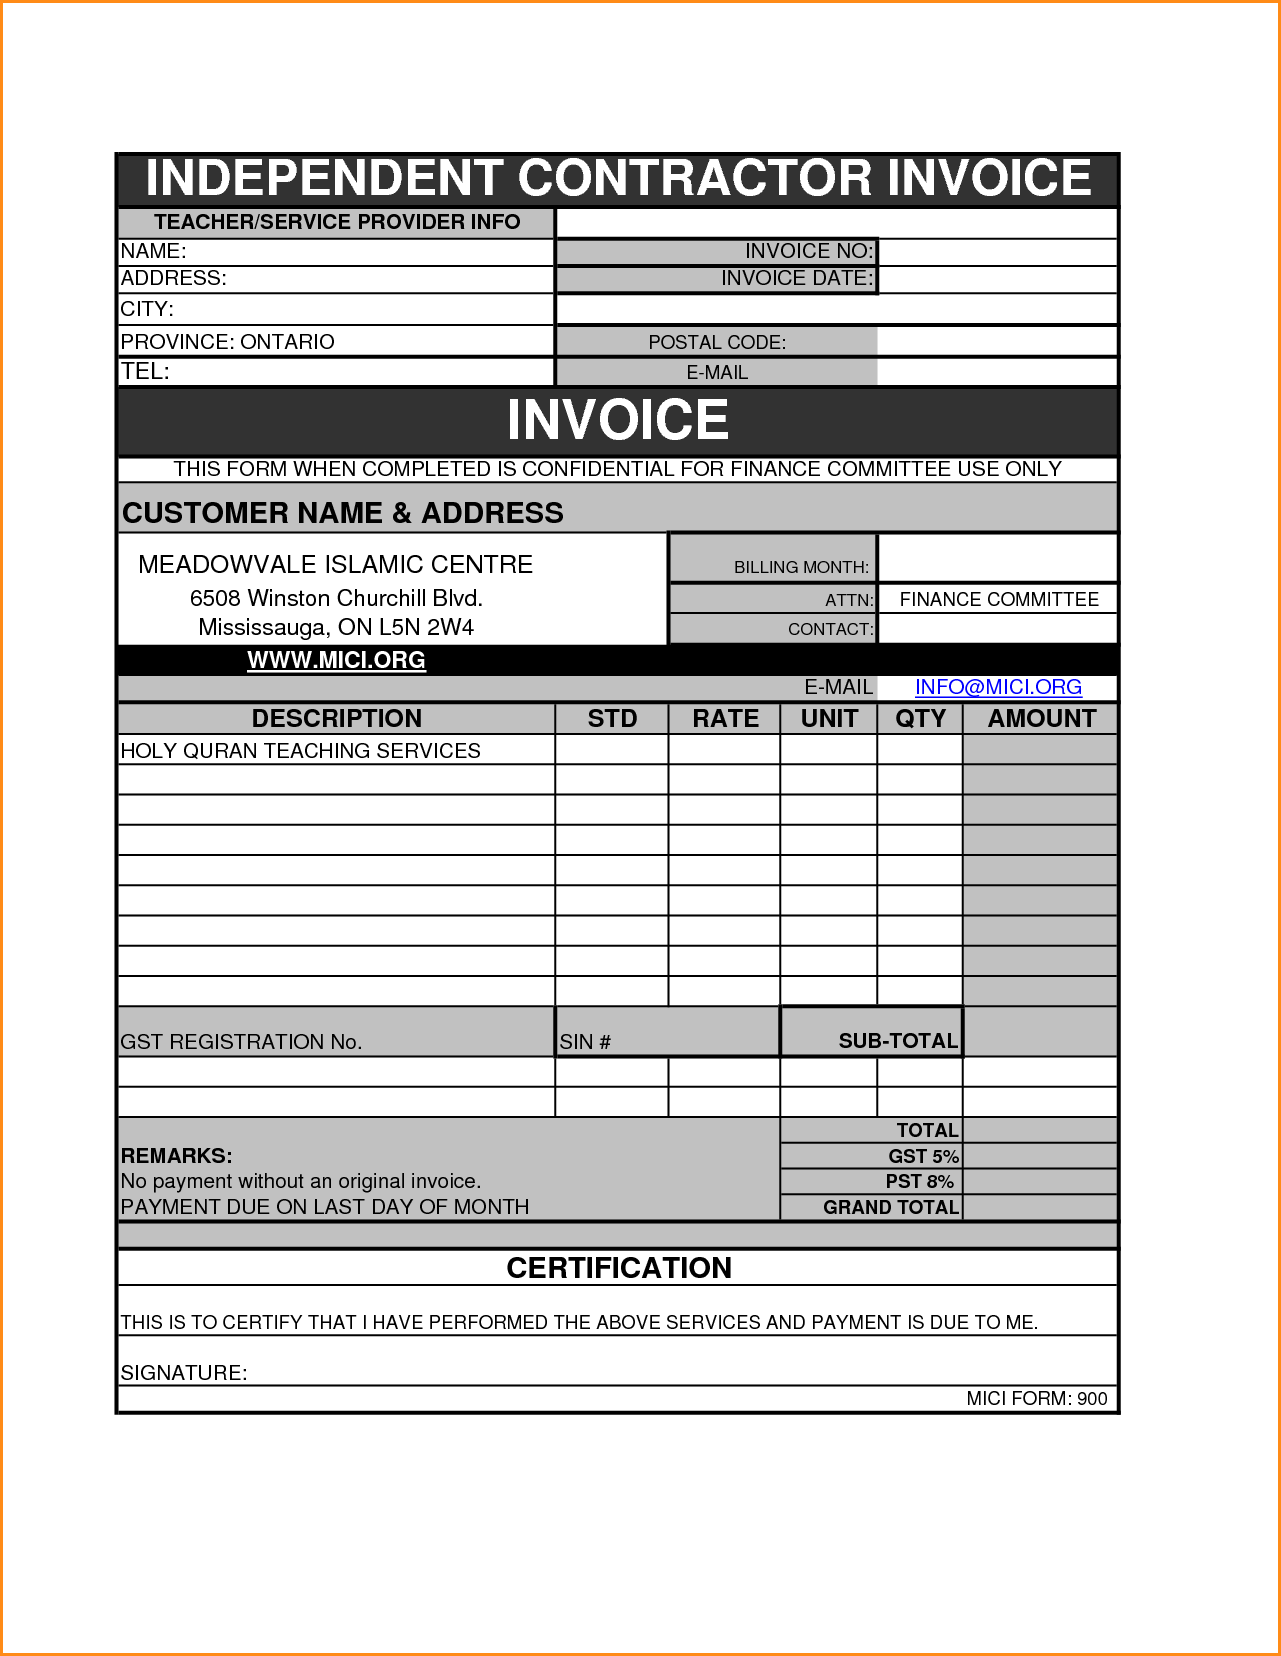 89 Adding Independent Contractor Invoice Template Maker for Independent Contractor Invoice Template